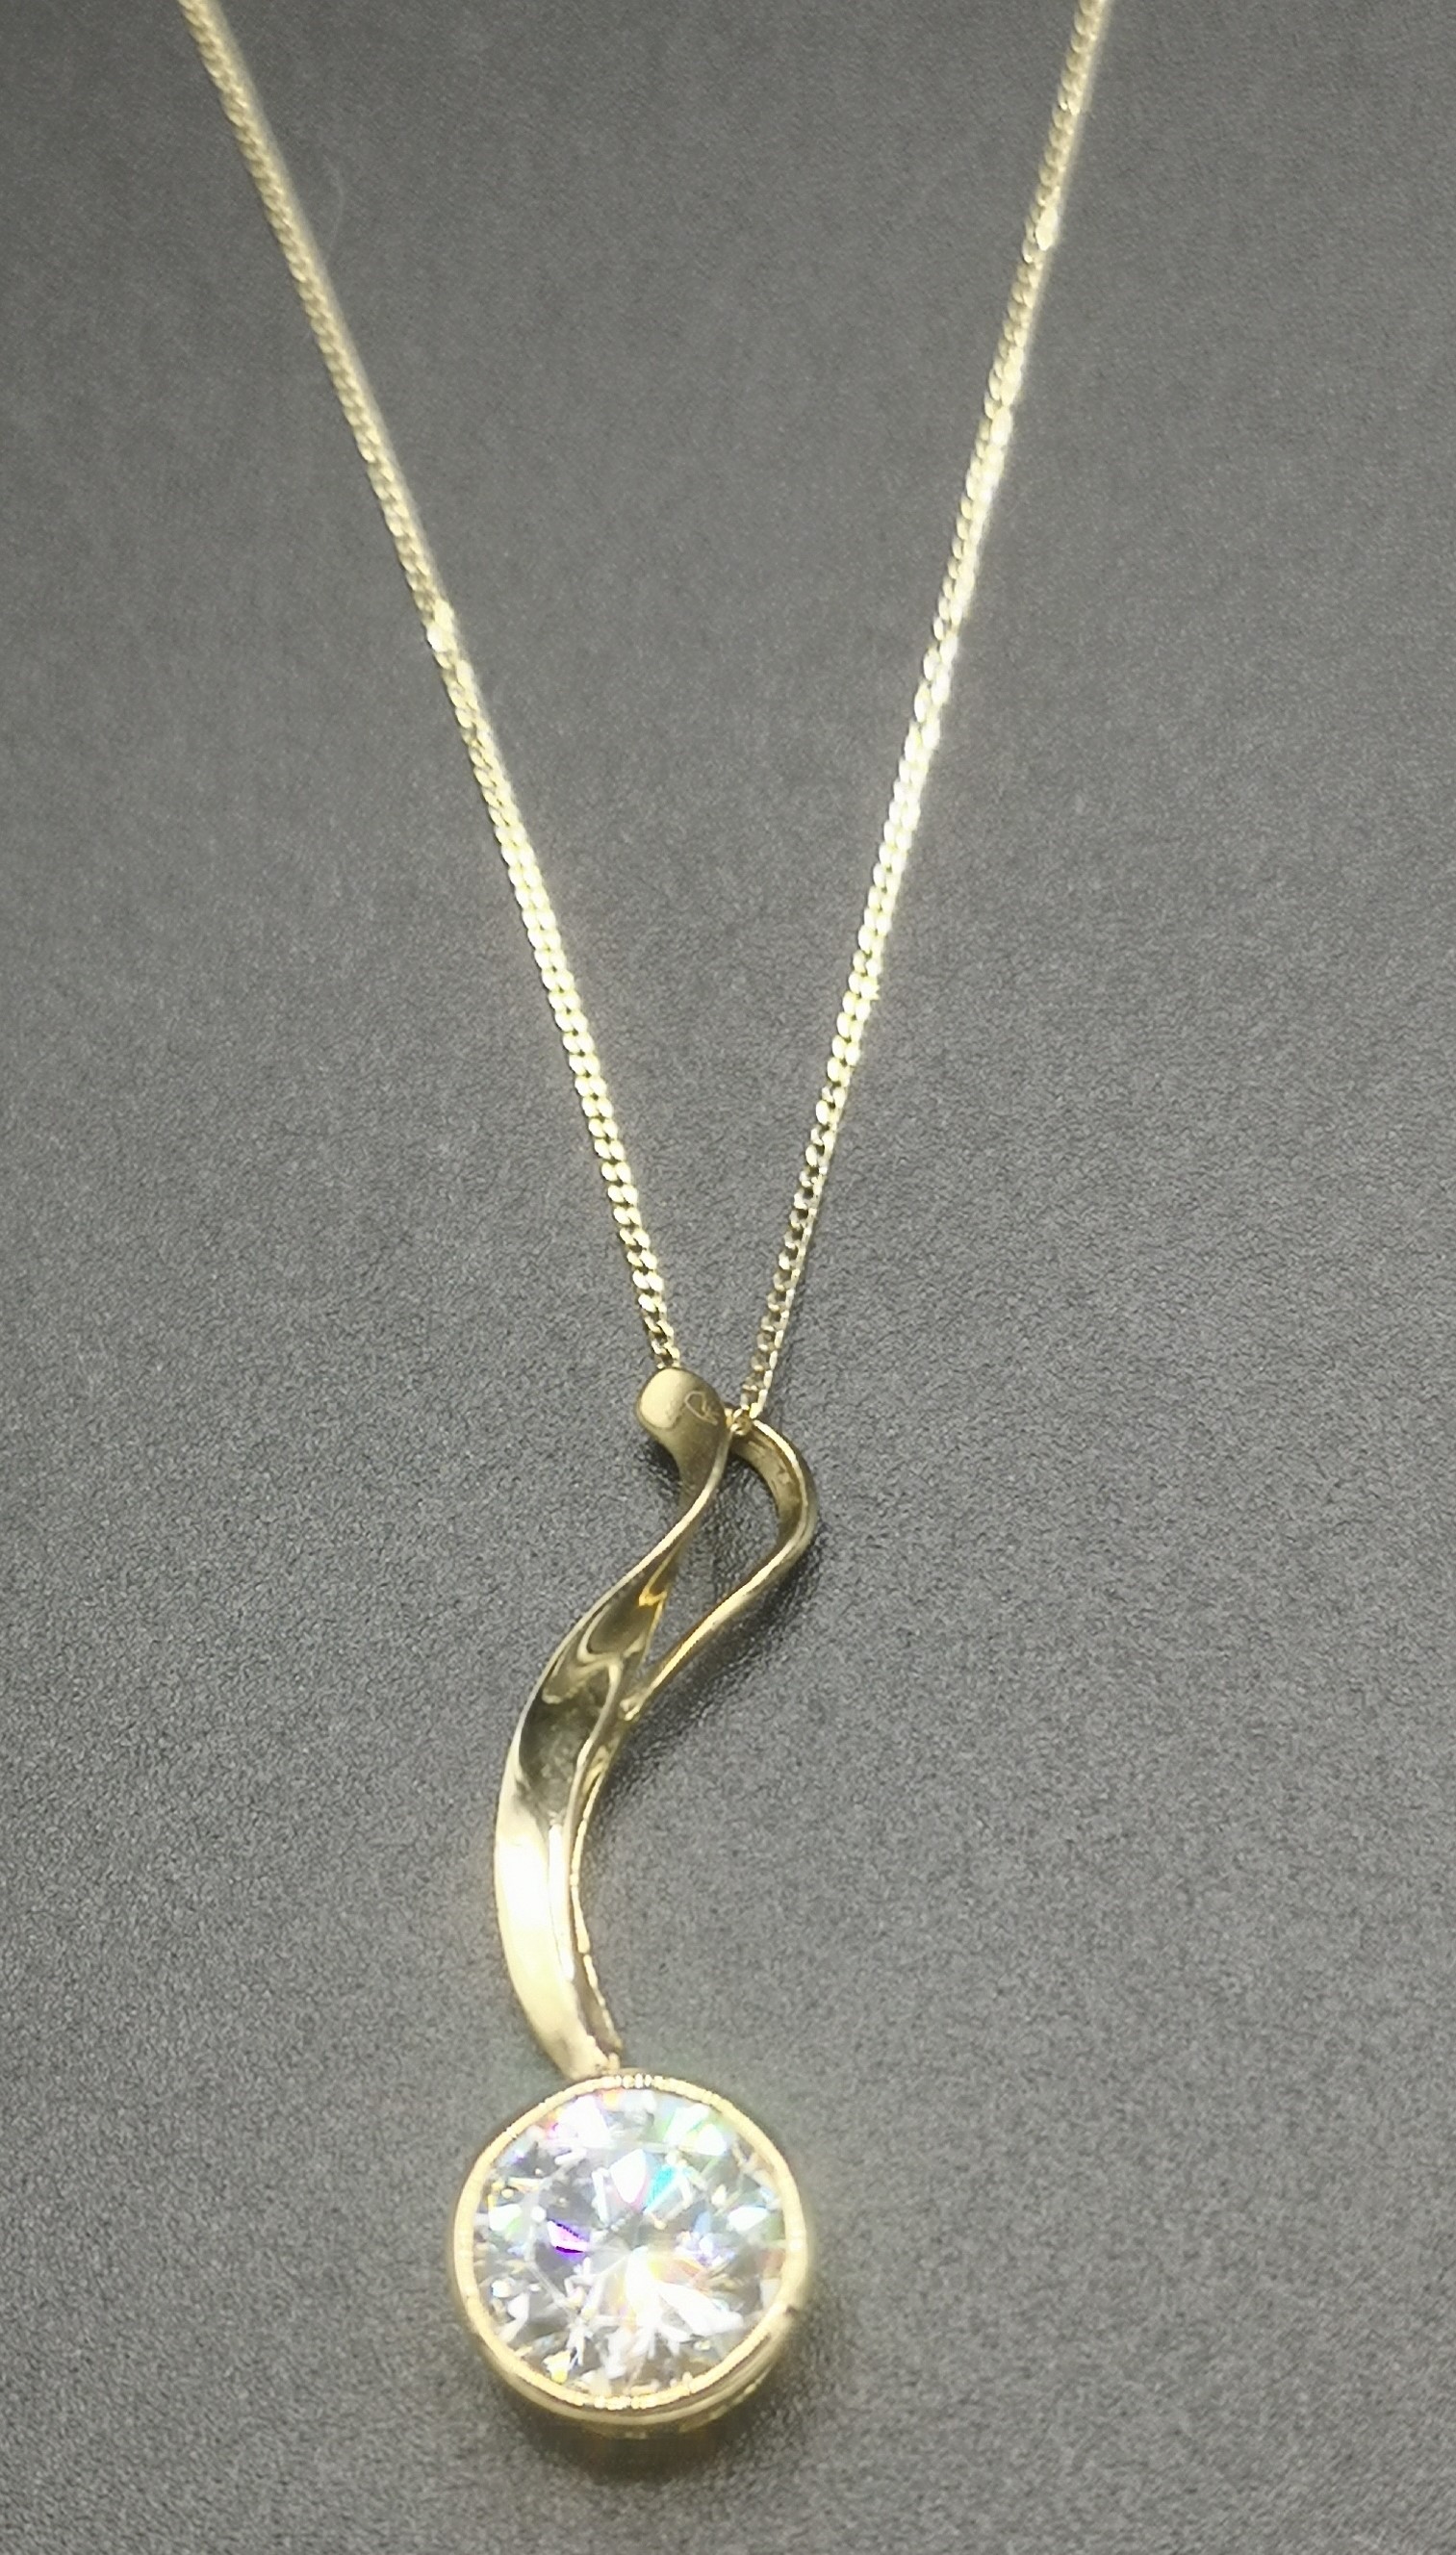 9ct gold necklace with 14ct gold pendant - Image 2 of 4